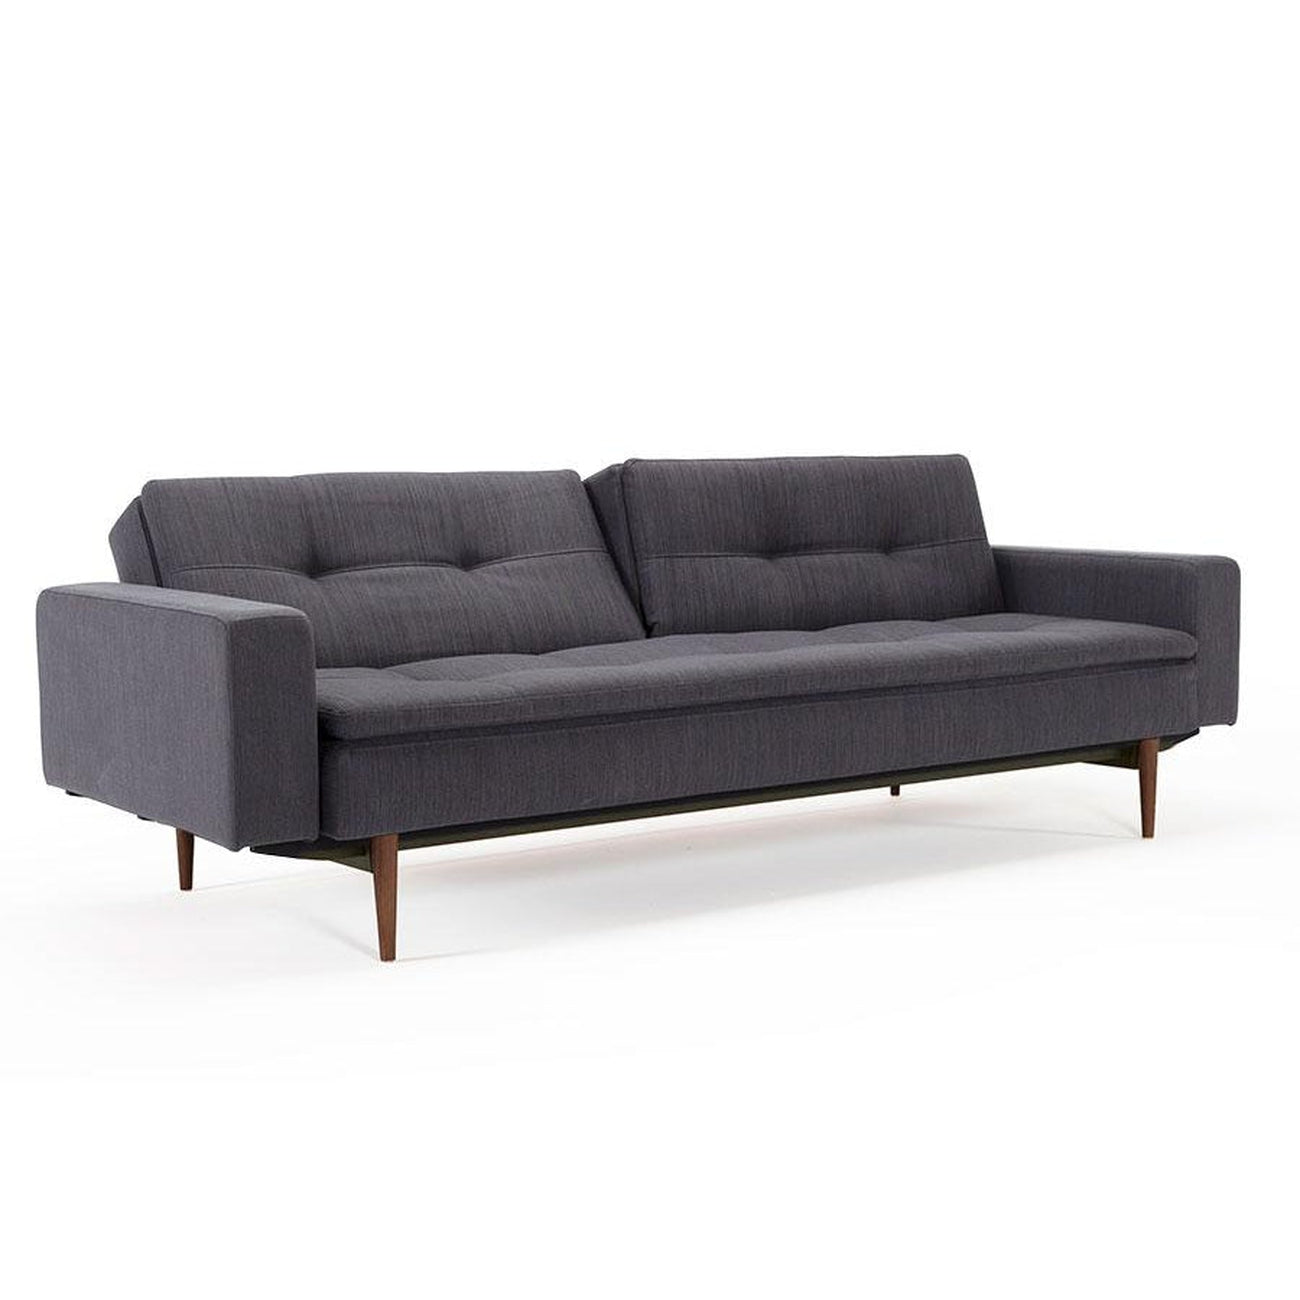 Dublexo Deluxe Sofa W/Arms,DARK WOOD-Innovation Living-INNO-94-741050020527-10-3-SofasMixed Dance Natural-8-France and Son